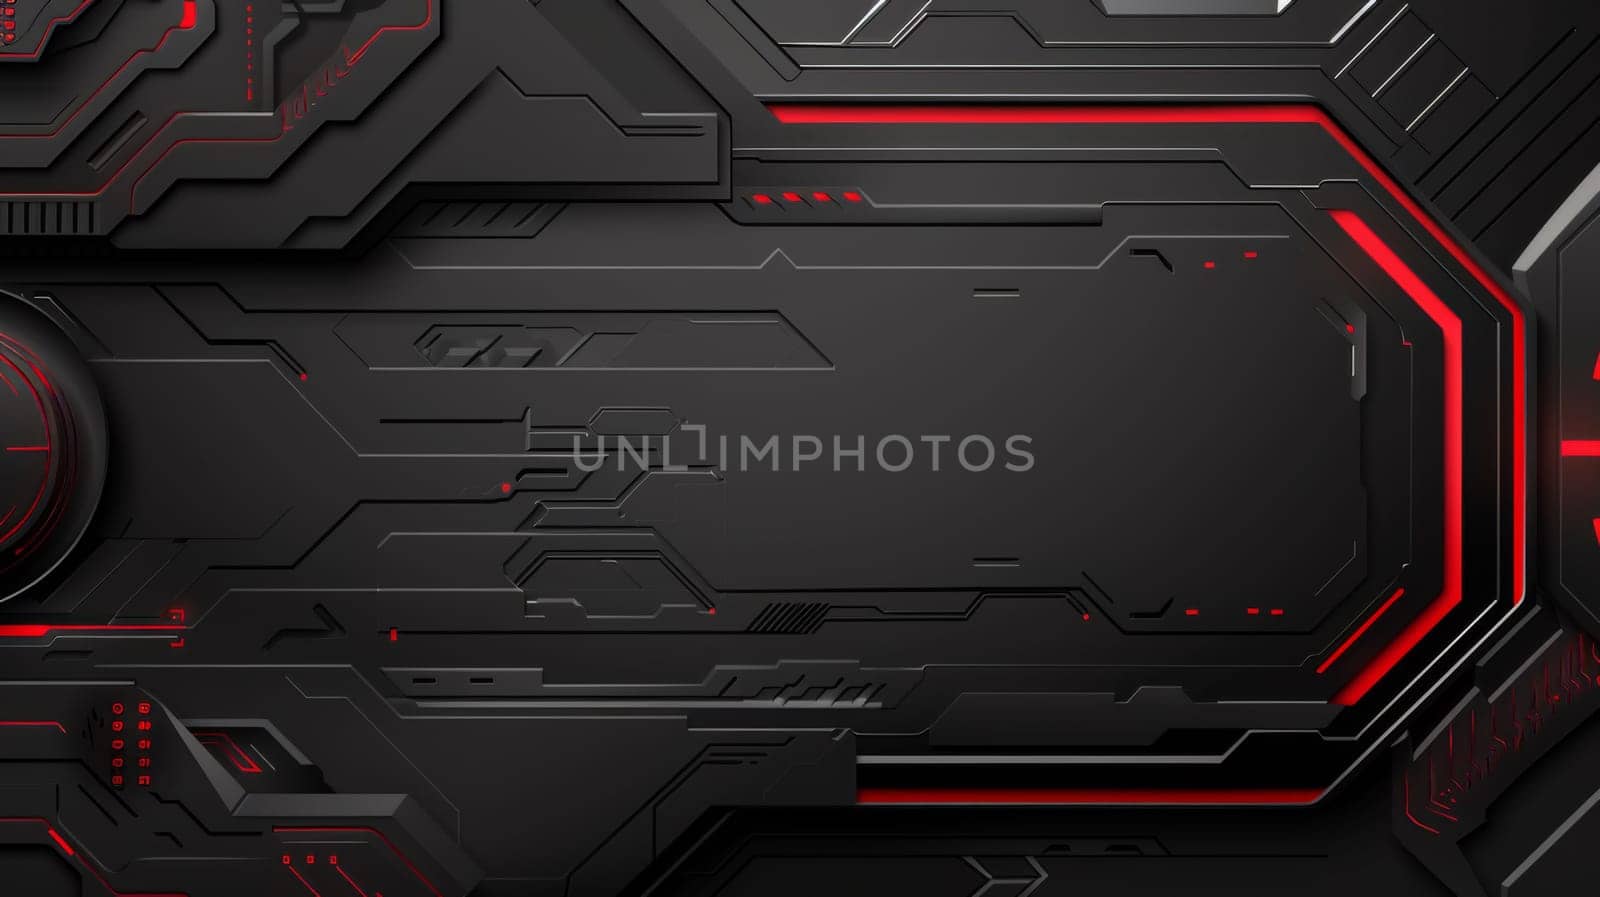 A futuristic black and red background with a glowing light